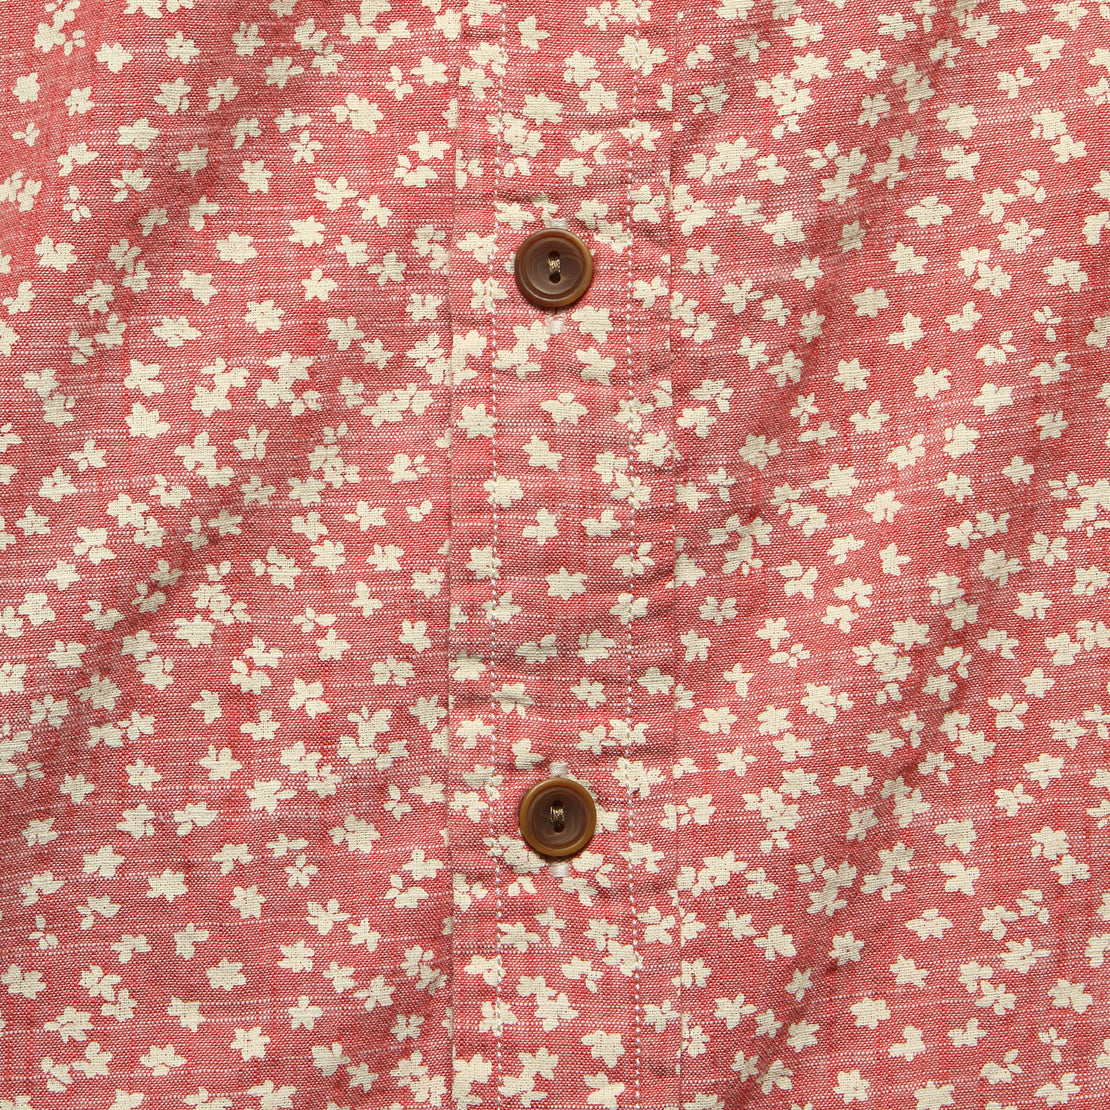 Drayton Shirt - Cranberry - Grayers - STAG Provisions - Tops - S/S Woven - Floral